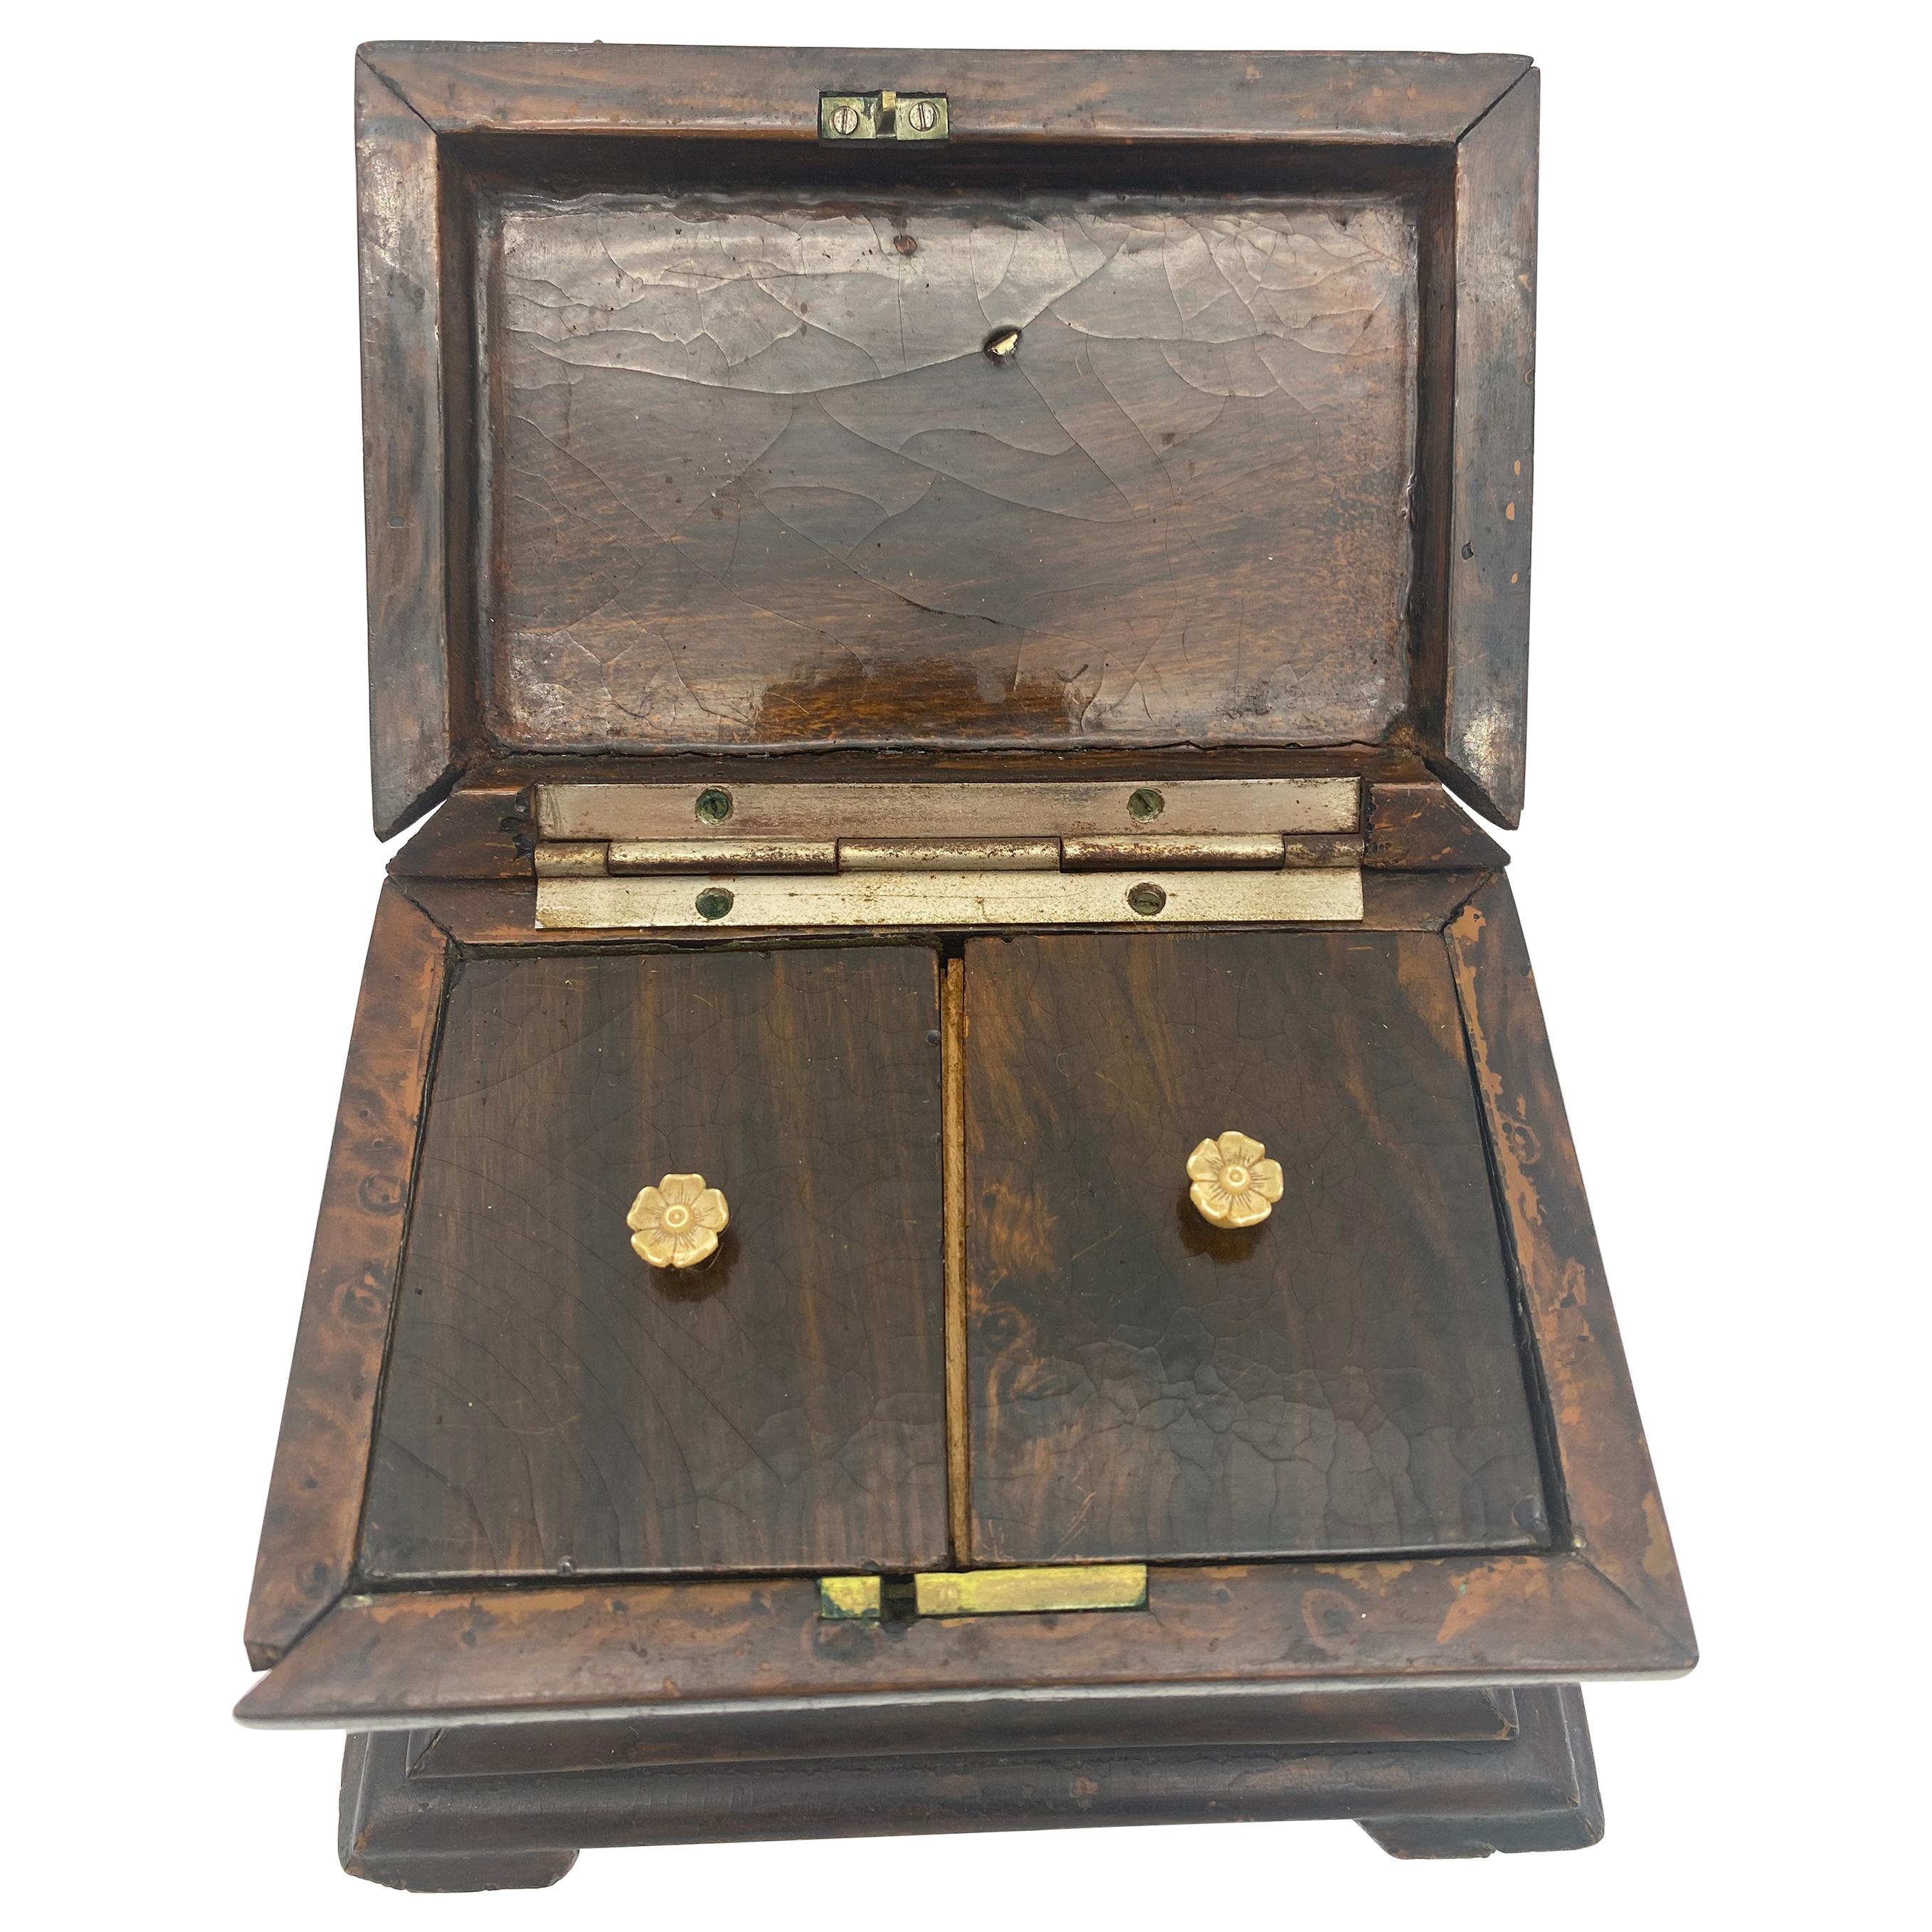 19th Century Tea Caddy with Brass Ornaments